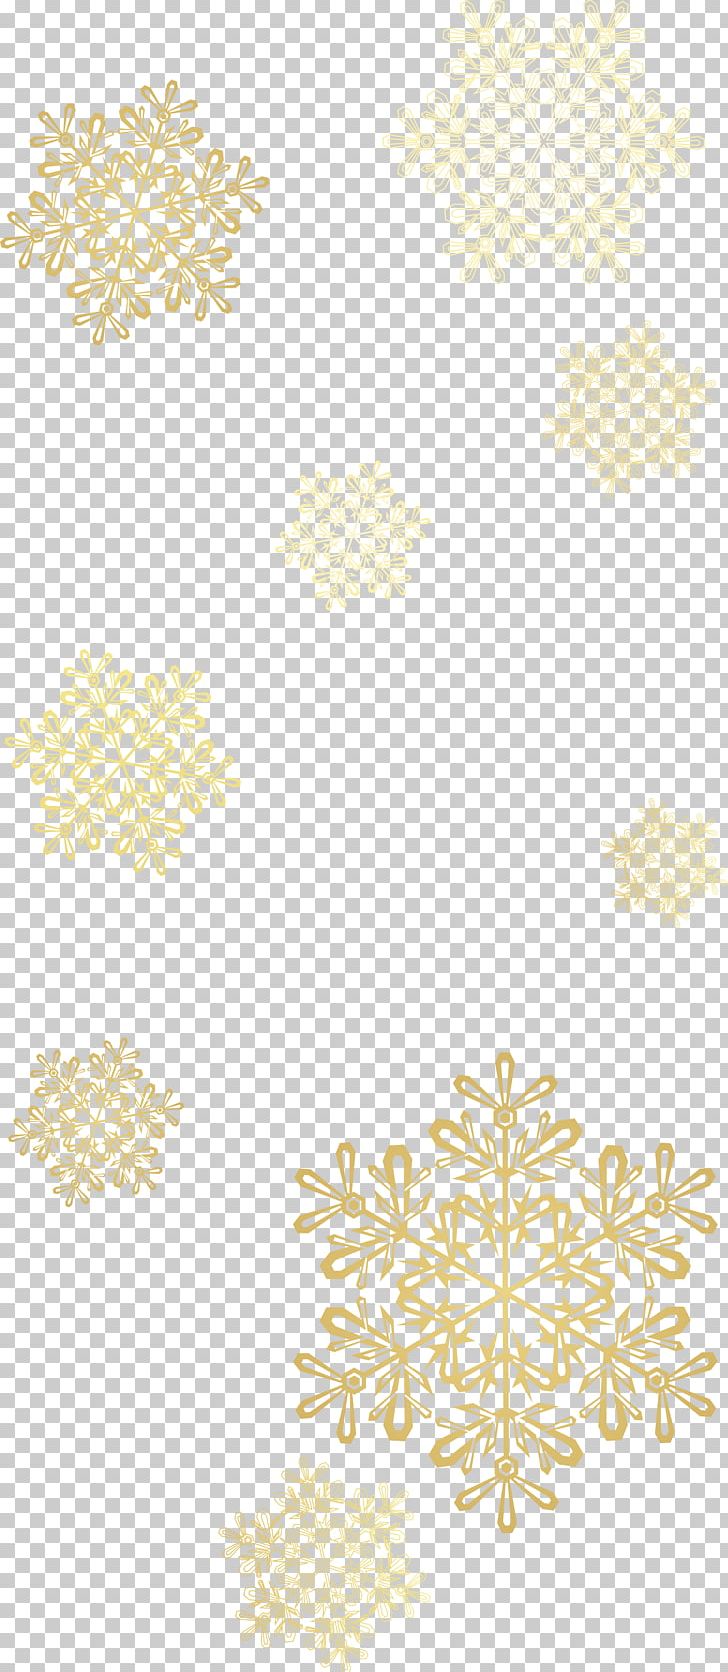 Area Yellow Hexagon Pattern PNG, Clipart, Area, Border, Decorative, Decorative Pattern, Dig Free PNG Download